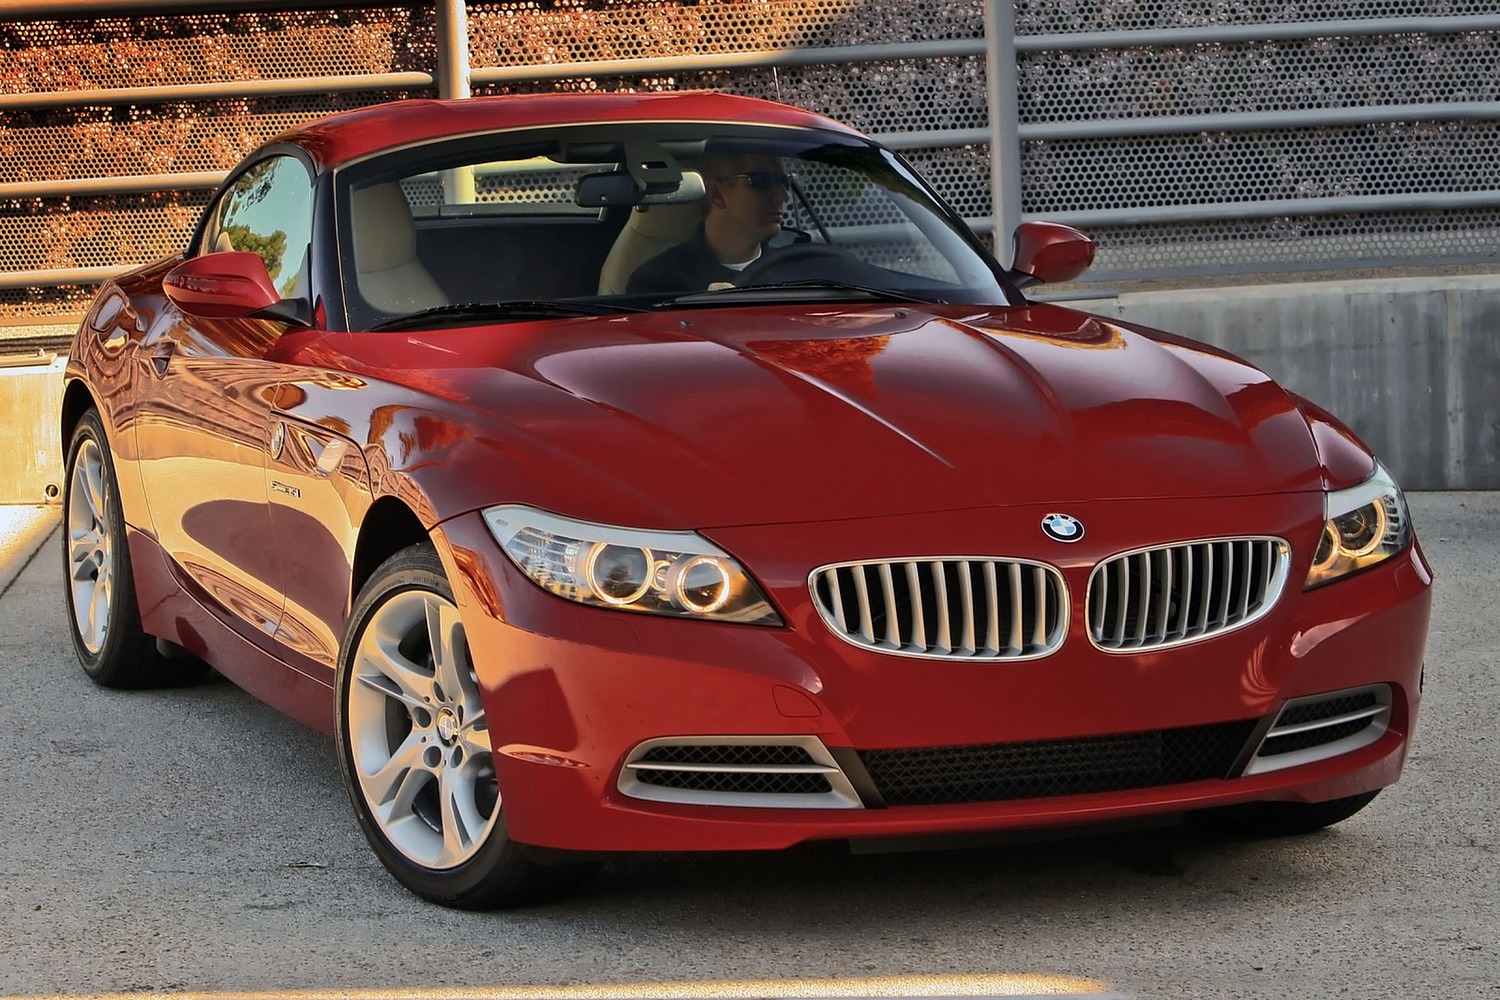 BMW Z4 sDrive35i Convertible Exterior (2012 model year shown)